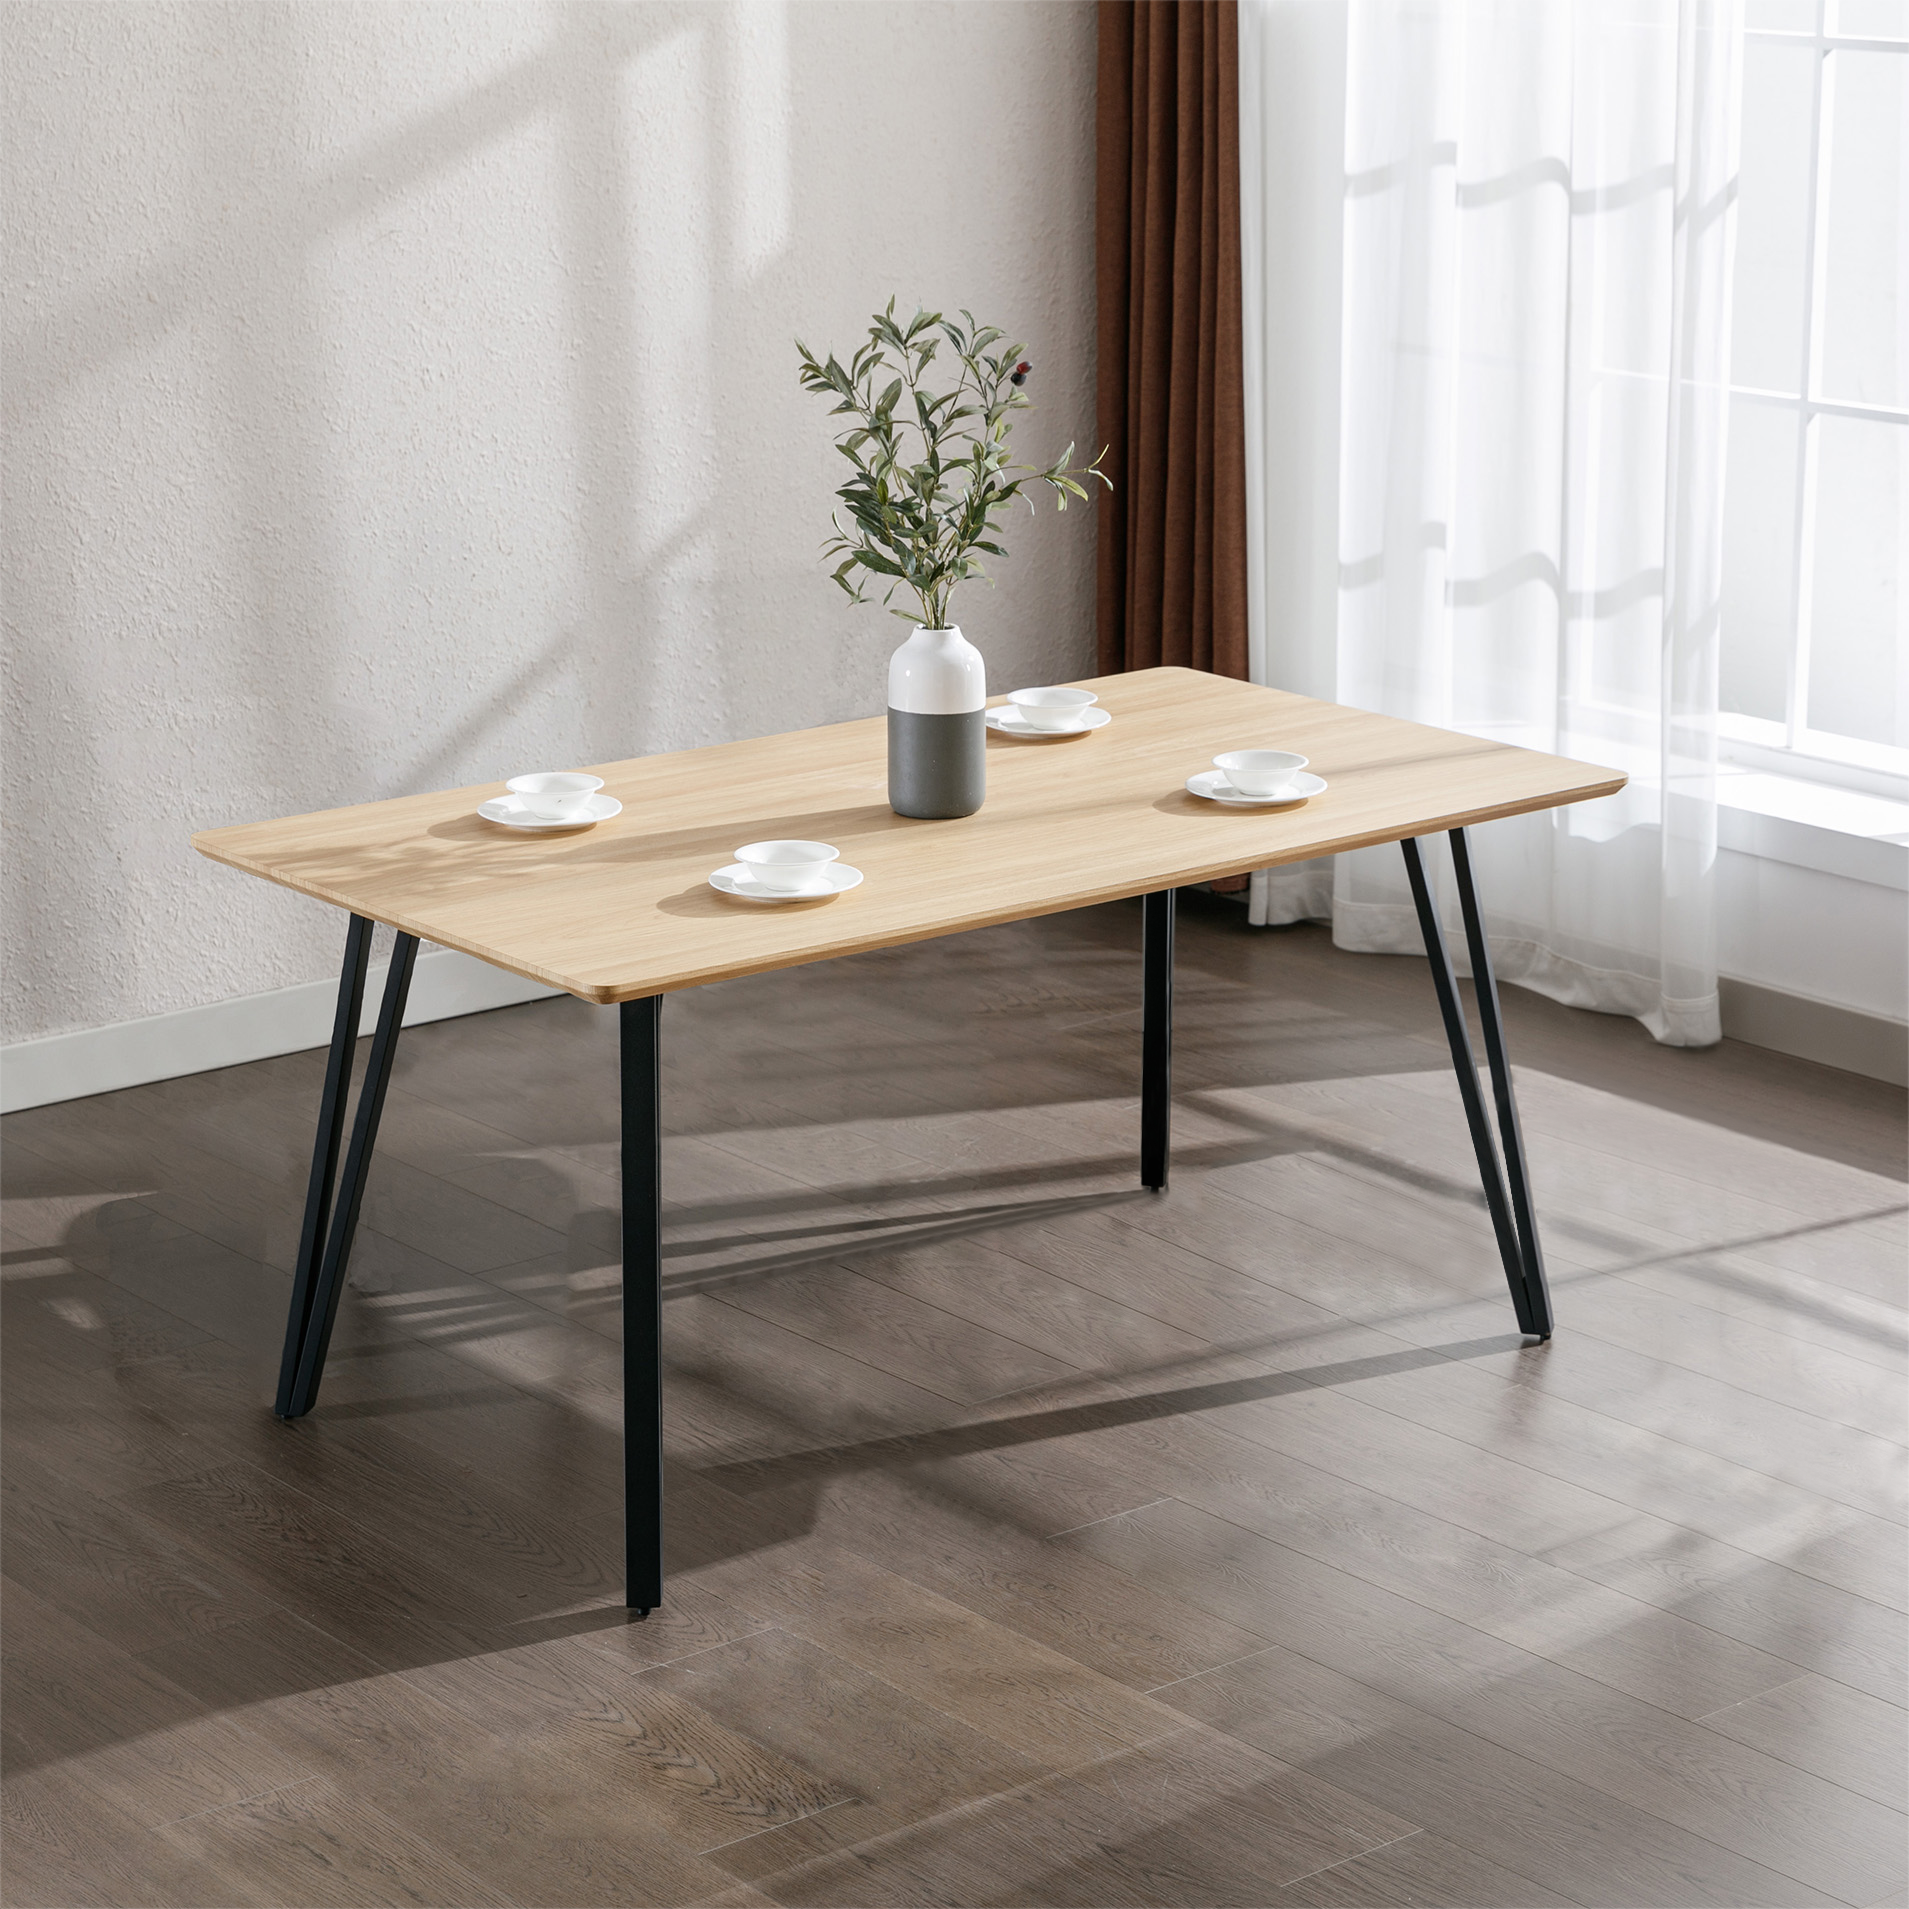 Keira Dining Table 63"